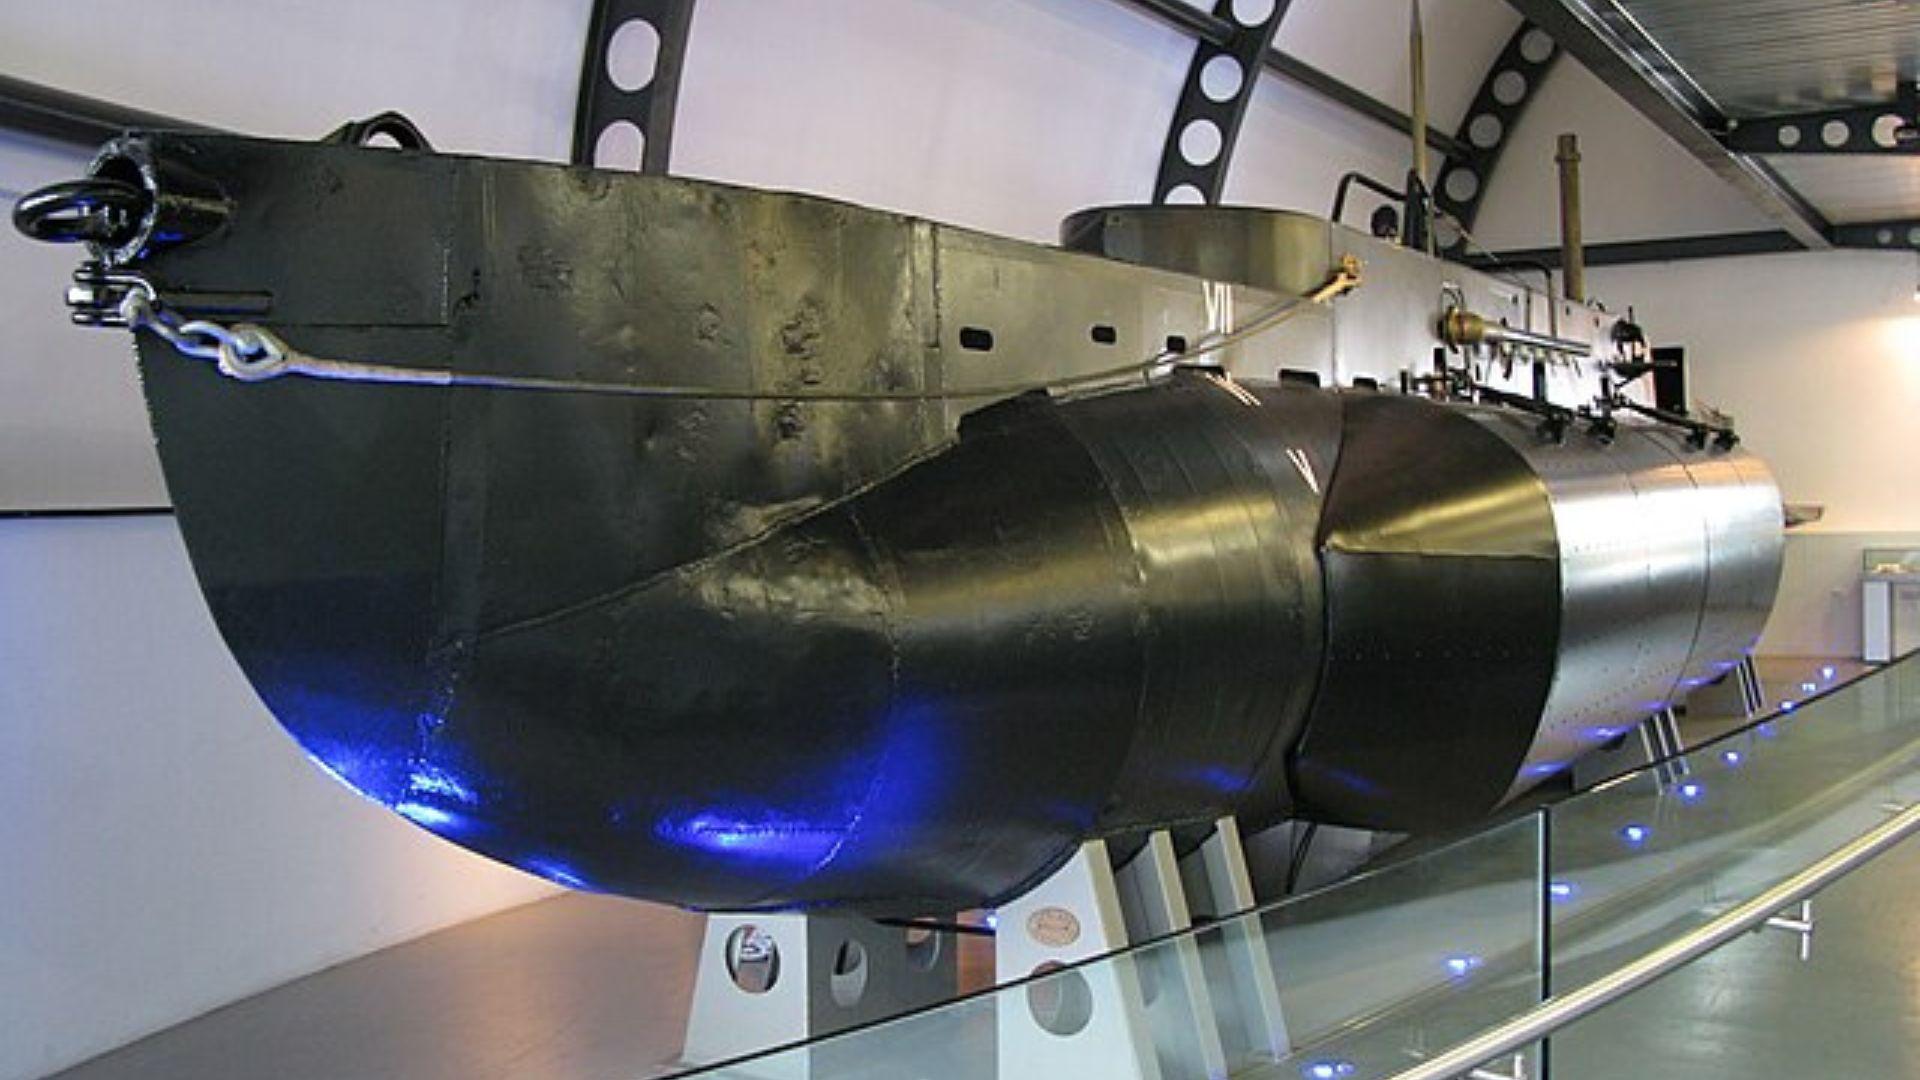 A historical X-craft midget submarine displayed in a museum